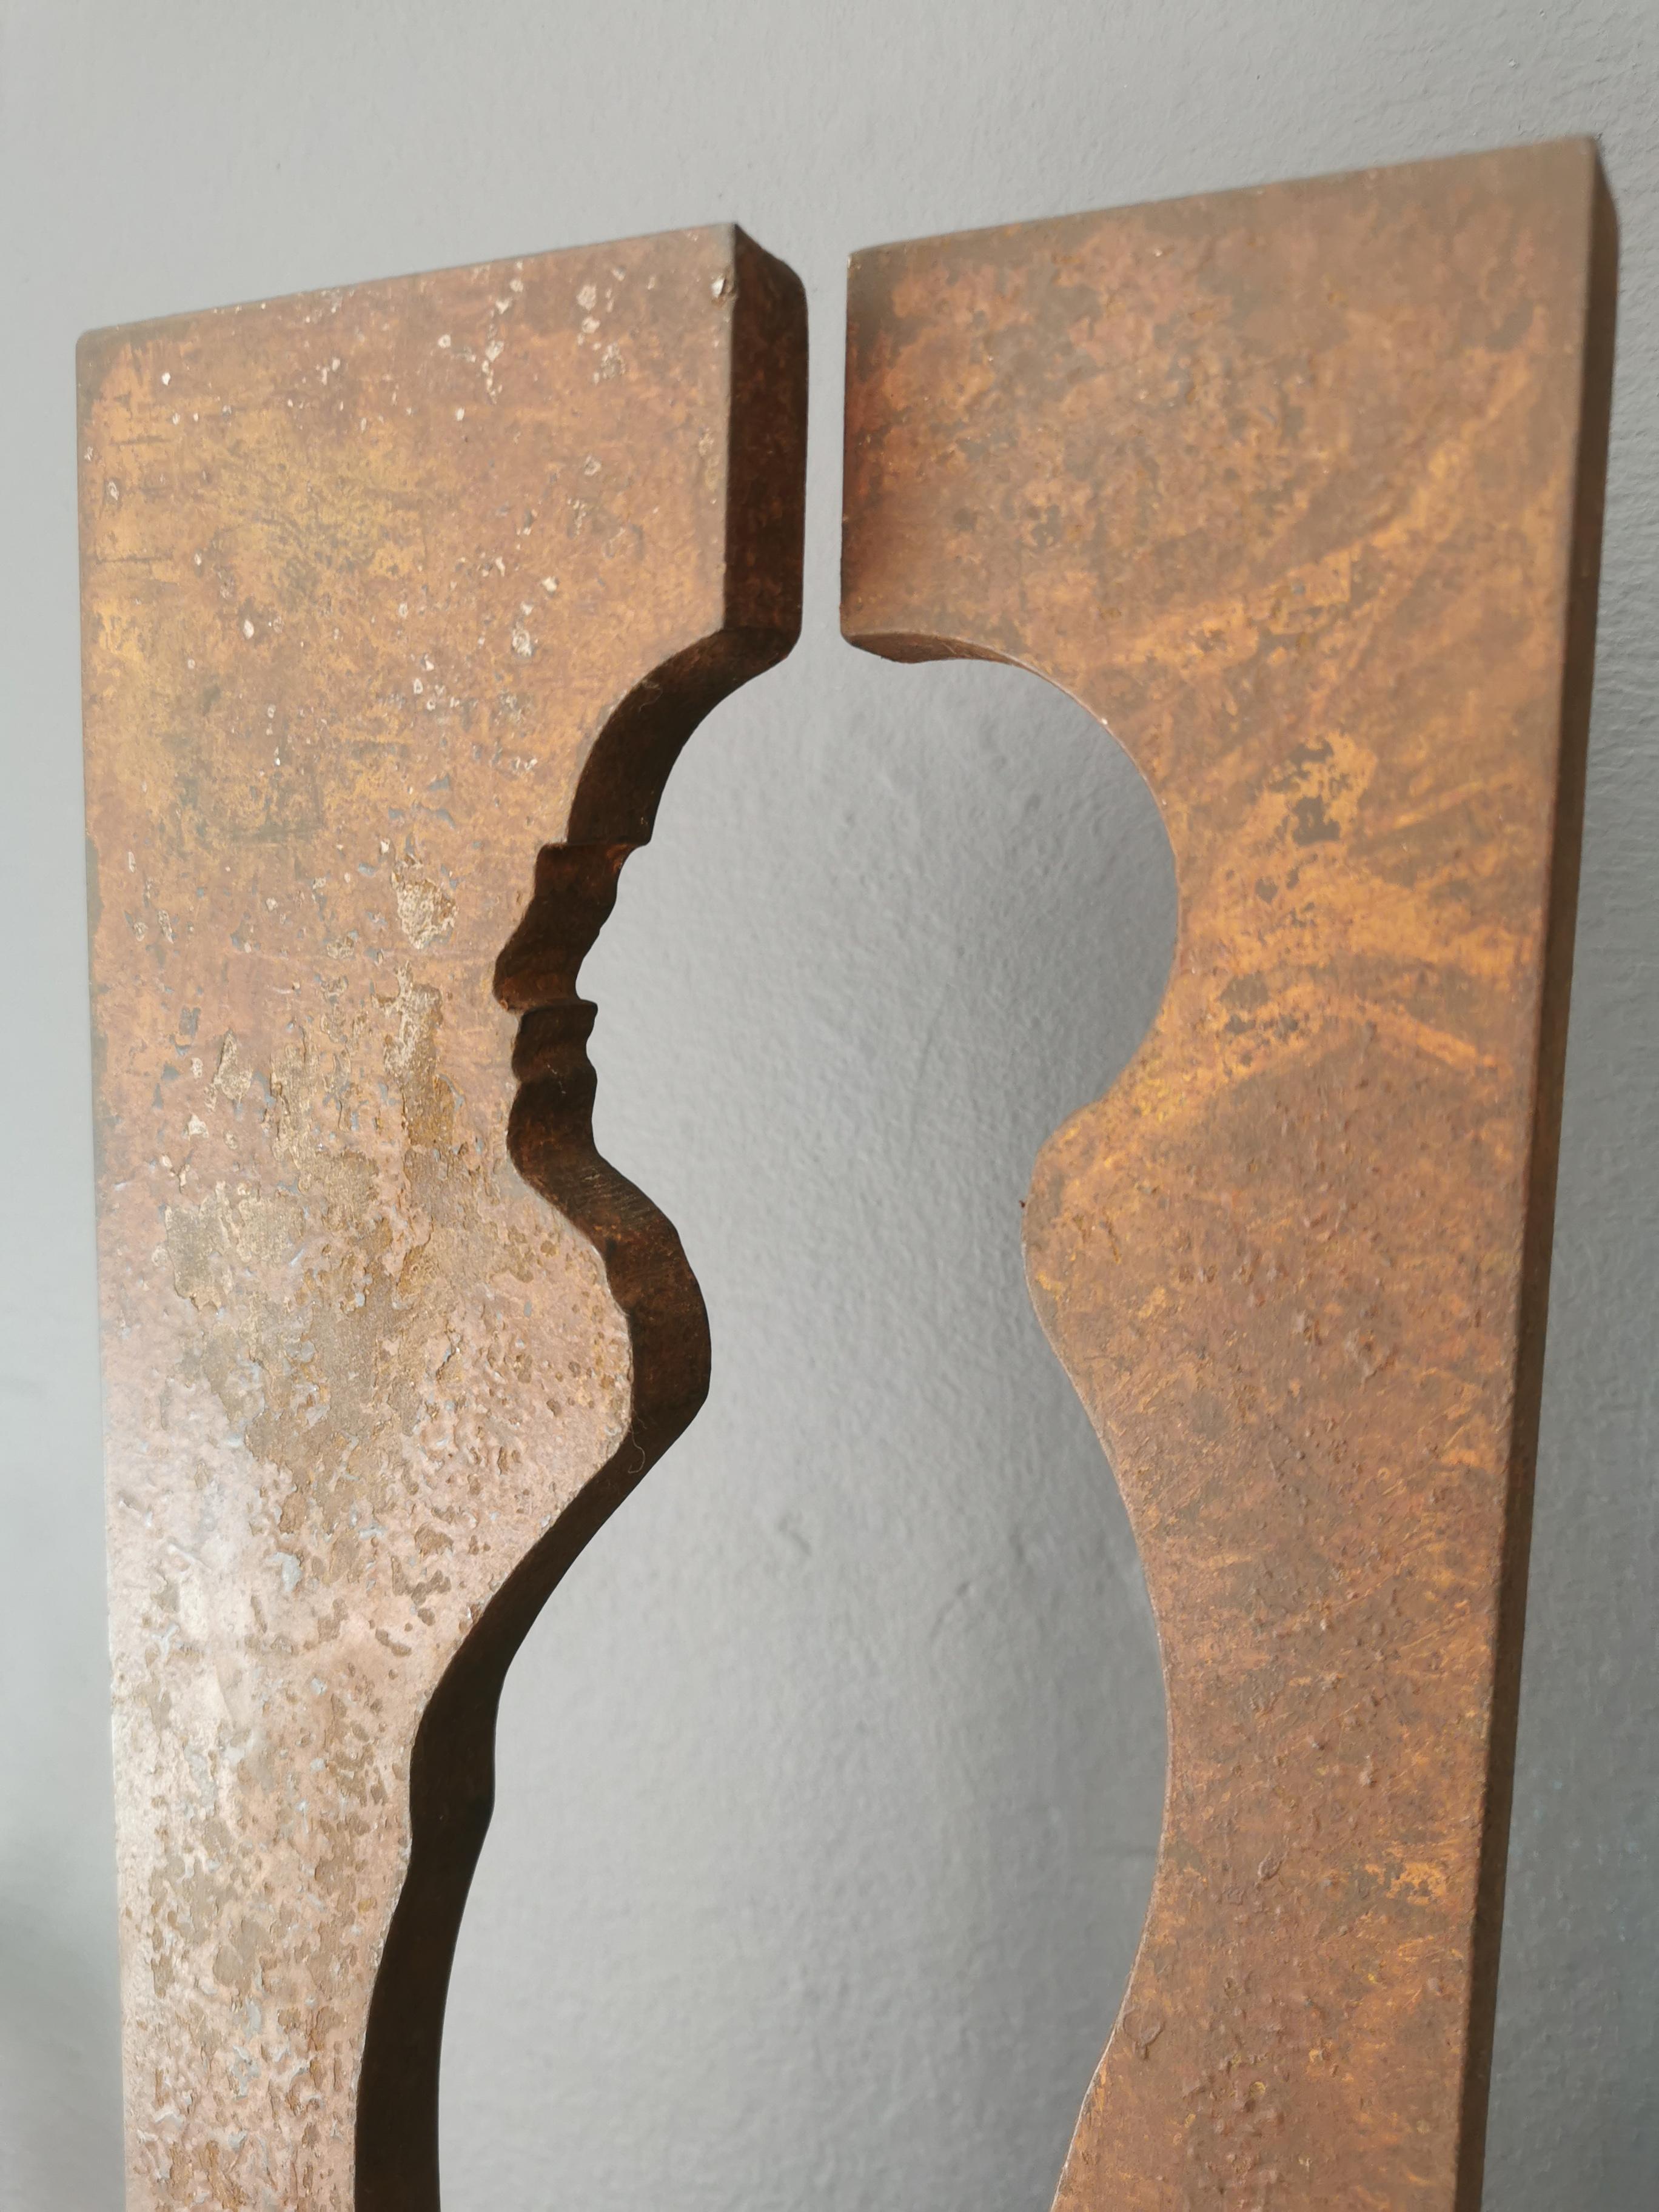 A medium sized, limited edition, abstracted figurative rusted steel sculpture on rusted steel base.  10mm thick steel. Edition 1/3. 